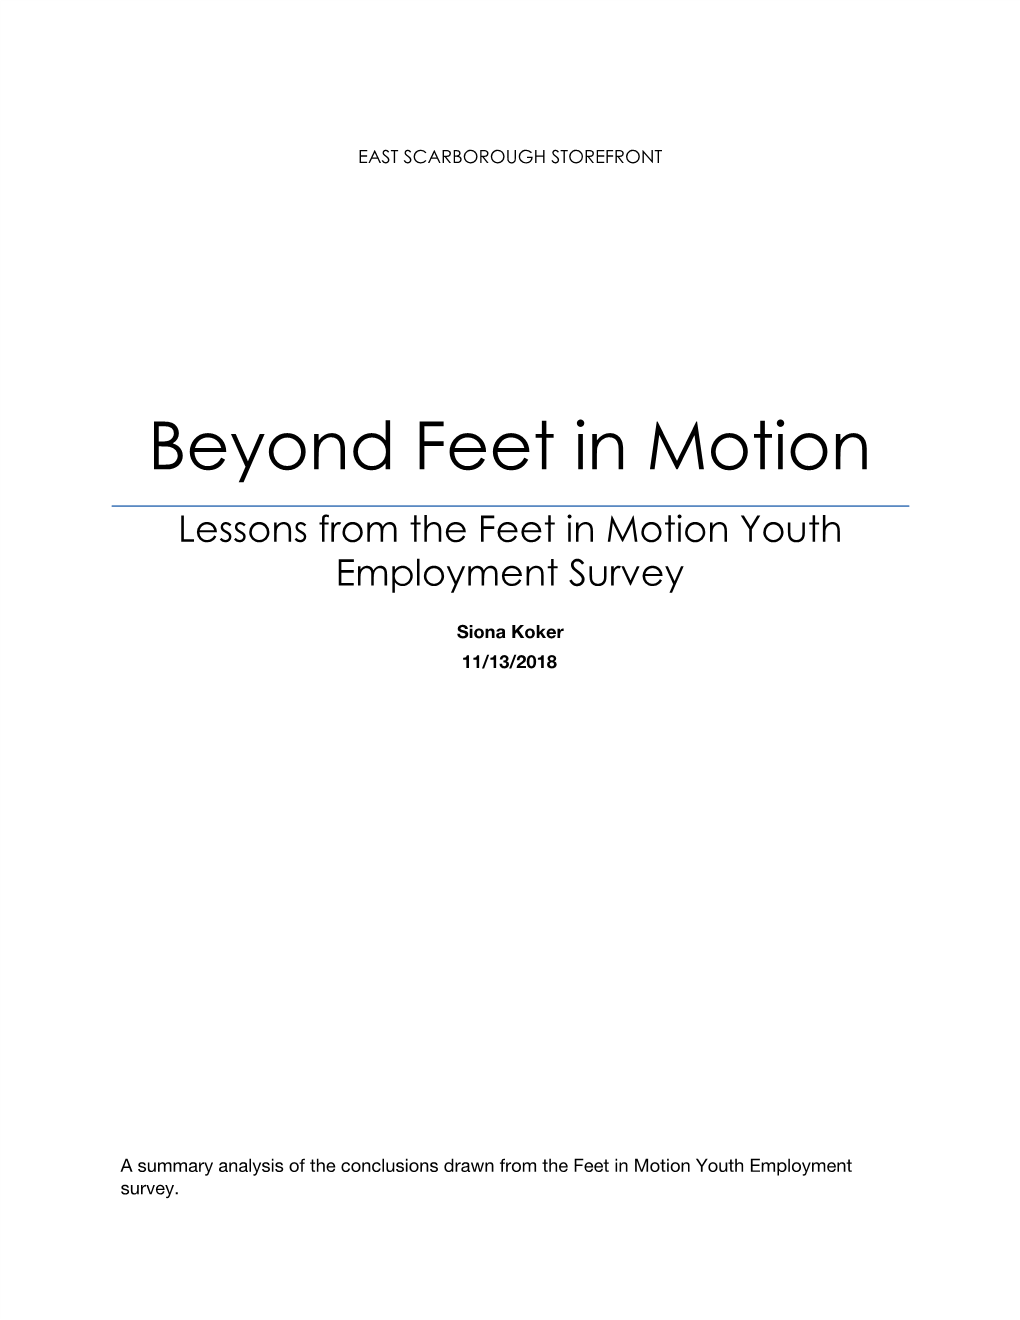 Lessons from the Feet in Motion Youth Employment Survey